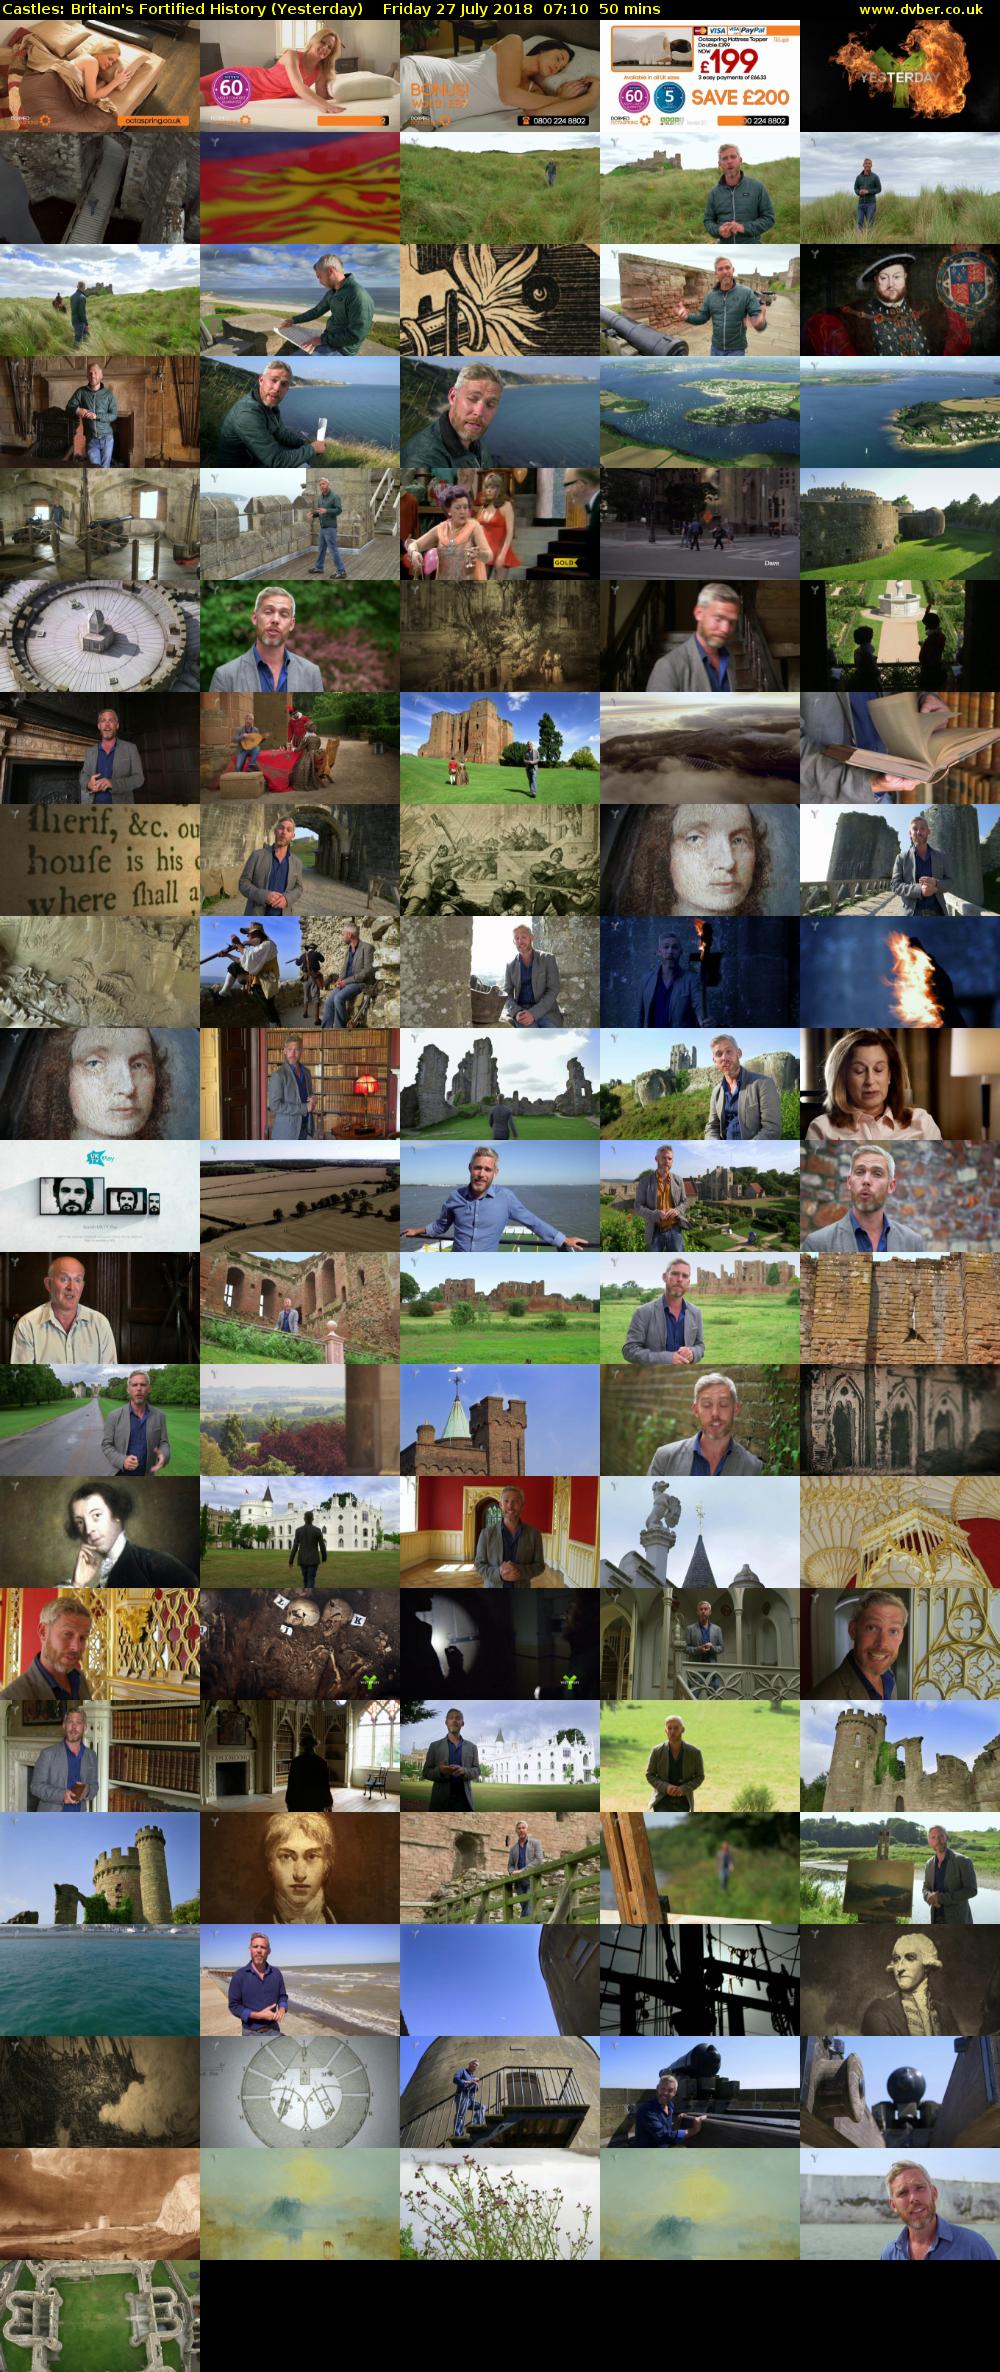 Castles: Britain's Fortified History (Yesterday) Friday 27 July 2018 07:10 - 08:00